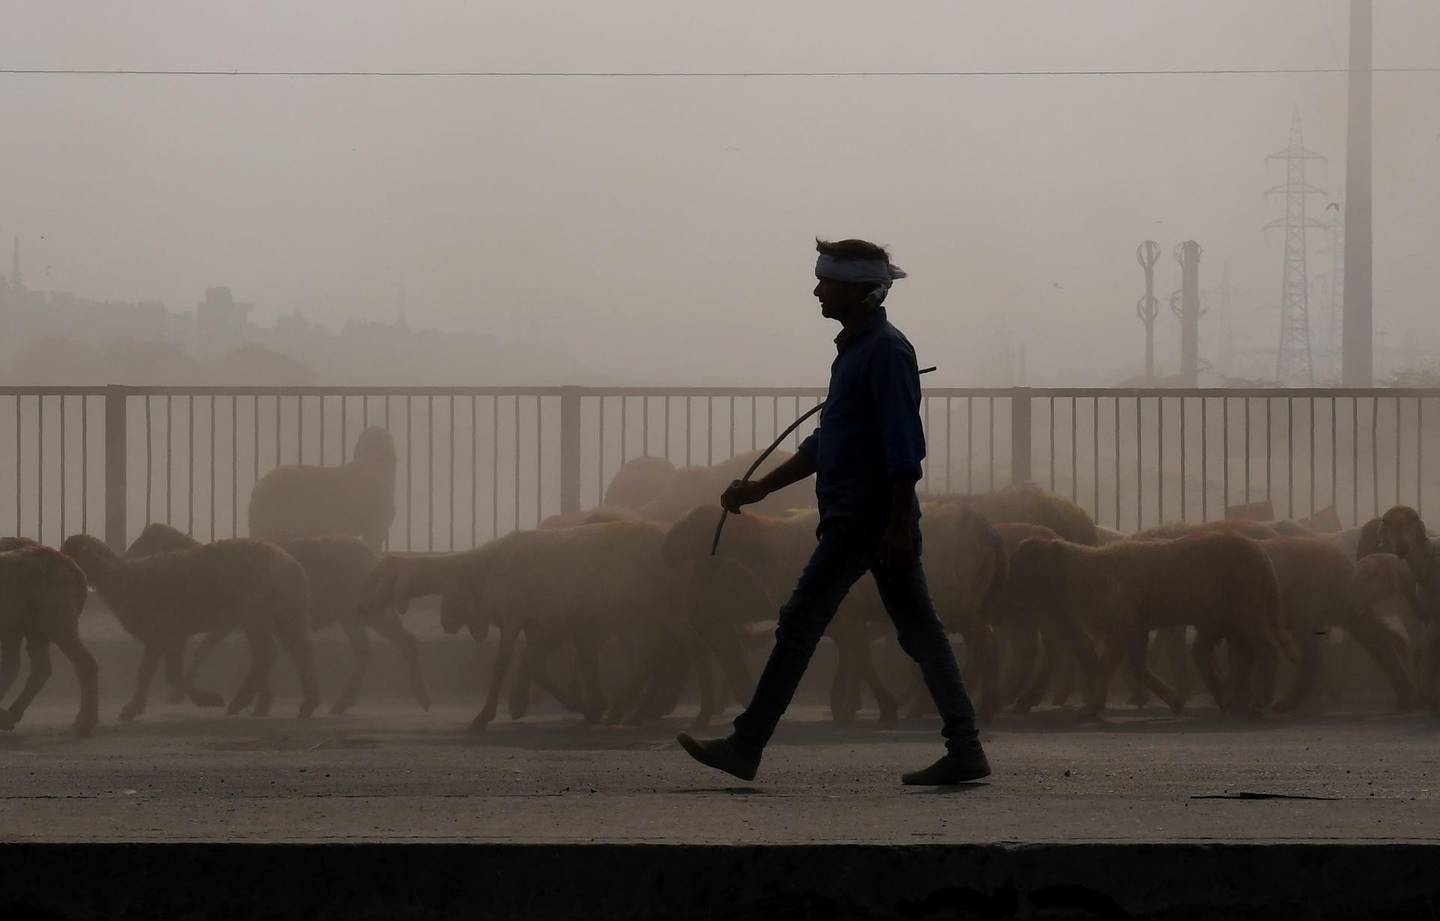 An Indian shepherd walks along his herd of sheep amidst heavy smog conditions in New Delhi on November 12, 2018. Air pollution in New Delhi hit hazardous levels on November 8 after a night of free-for-all Diwali fireworks, despite Supreme Court efforts to curb partying that fuels the Indian capital's toxic smog problem. / AFP / Money SHARMA
